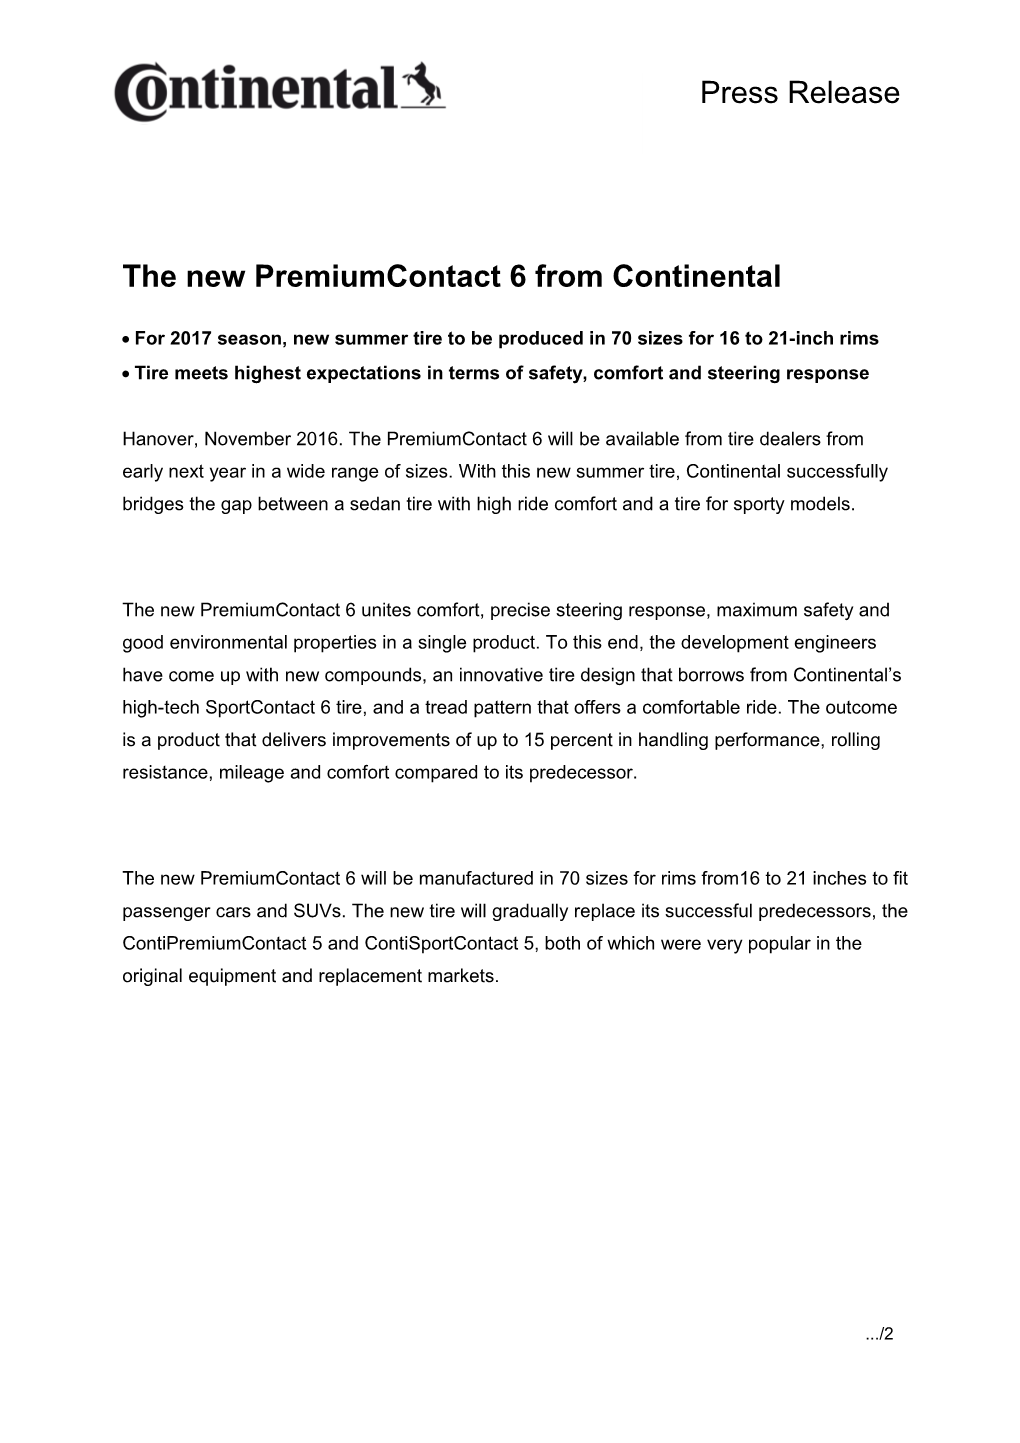 The New Premiumcontact 6 from Continental